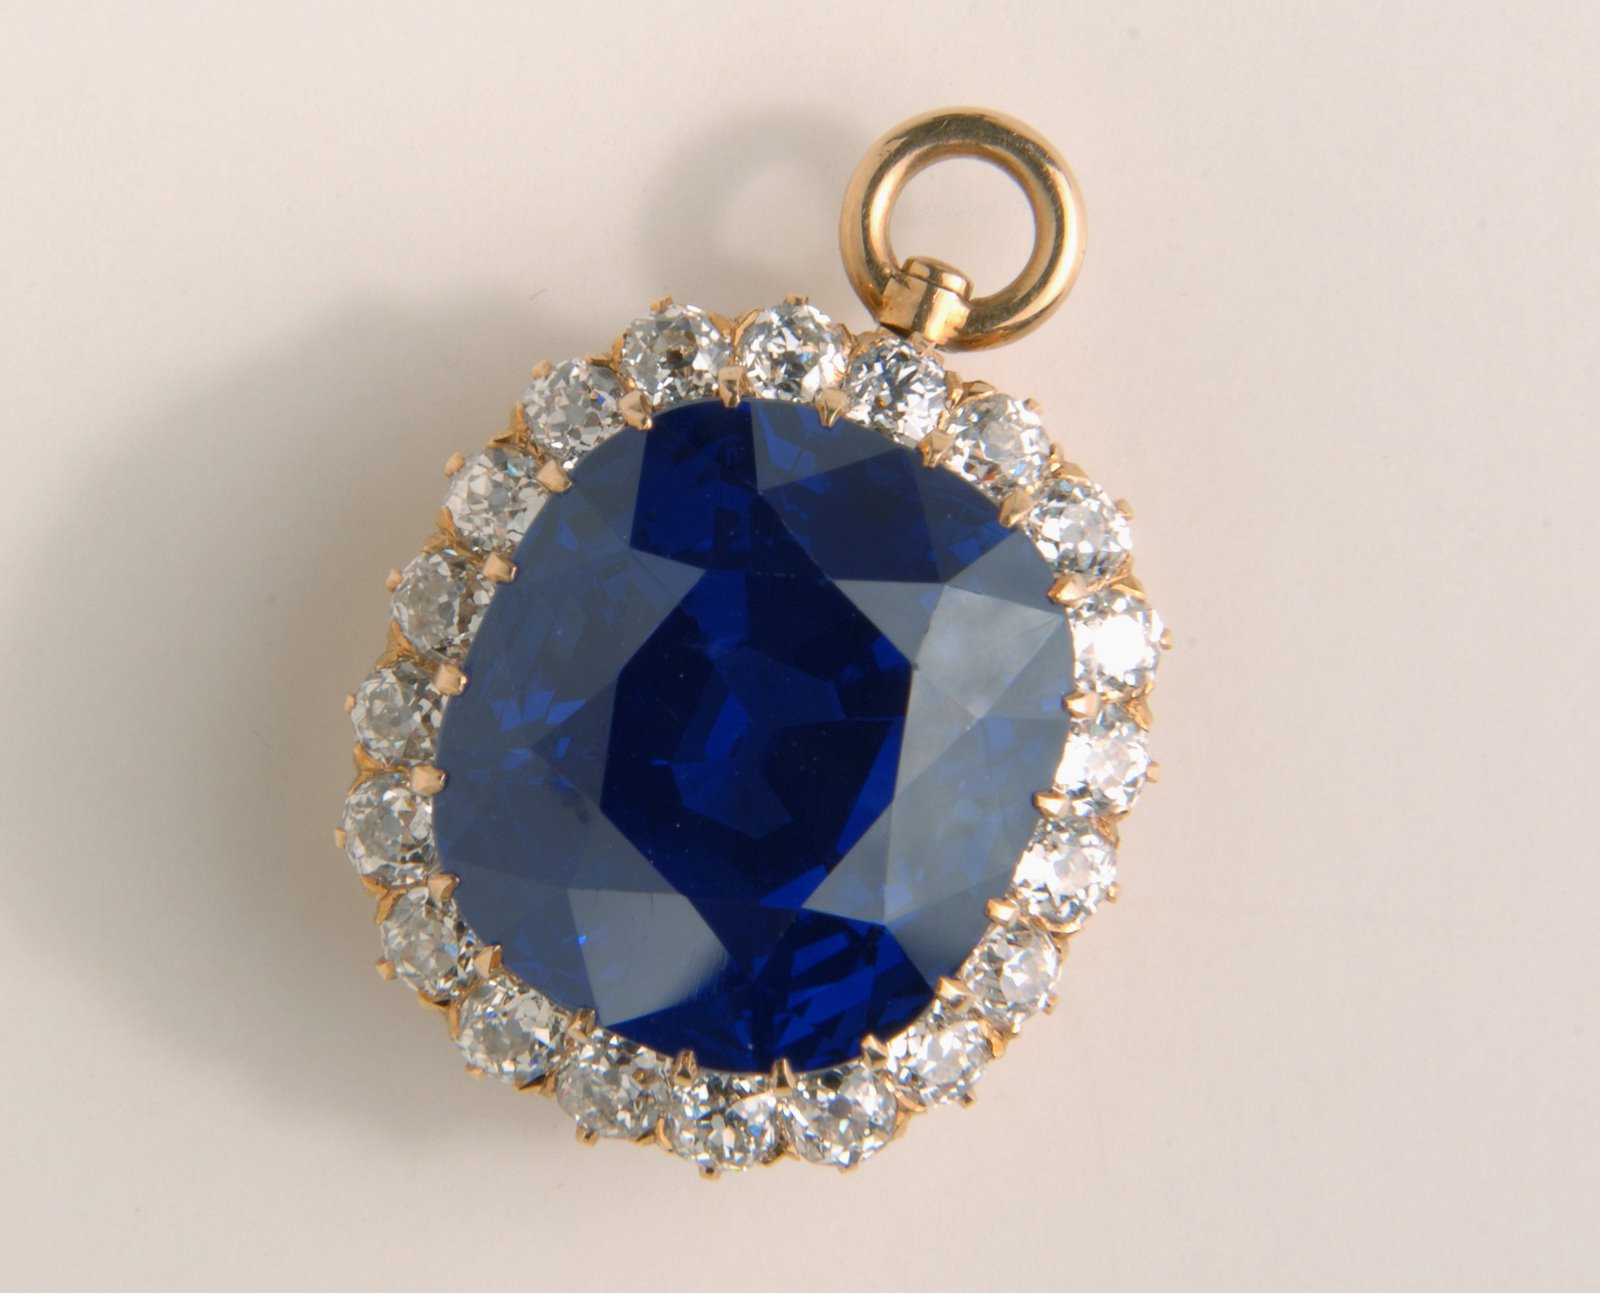 Hill’s Sapphire,The Most Expensive Sapphire In The World